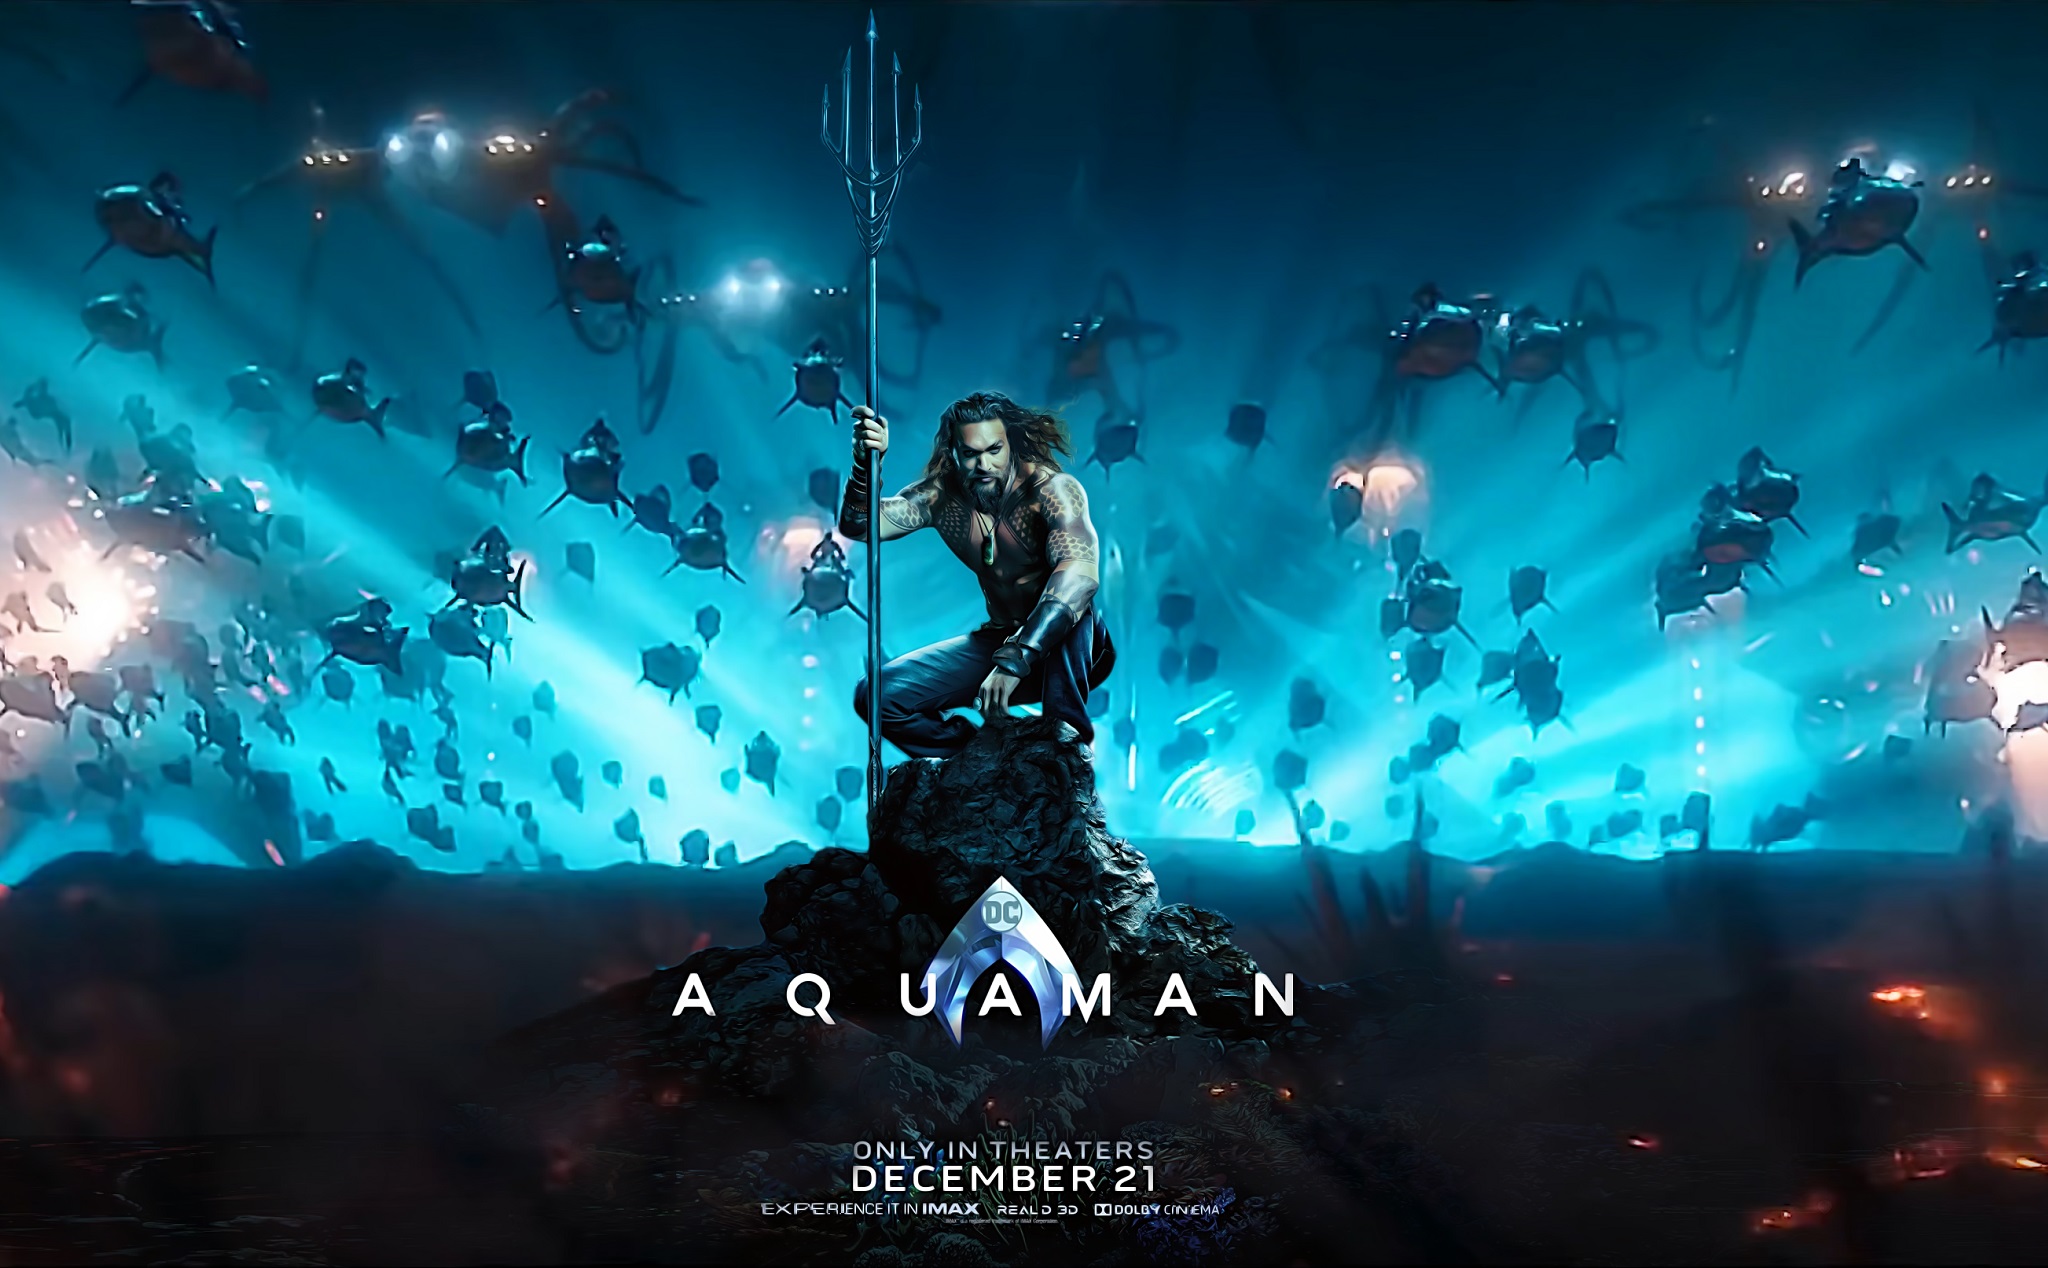 Lịch phim chiếu rạp tháng 12: Aquaman, Bumblebee, Between Worlds, Spider-Man: Into Spider-Verse